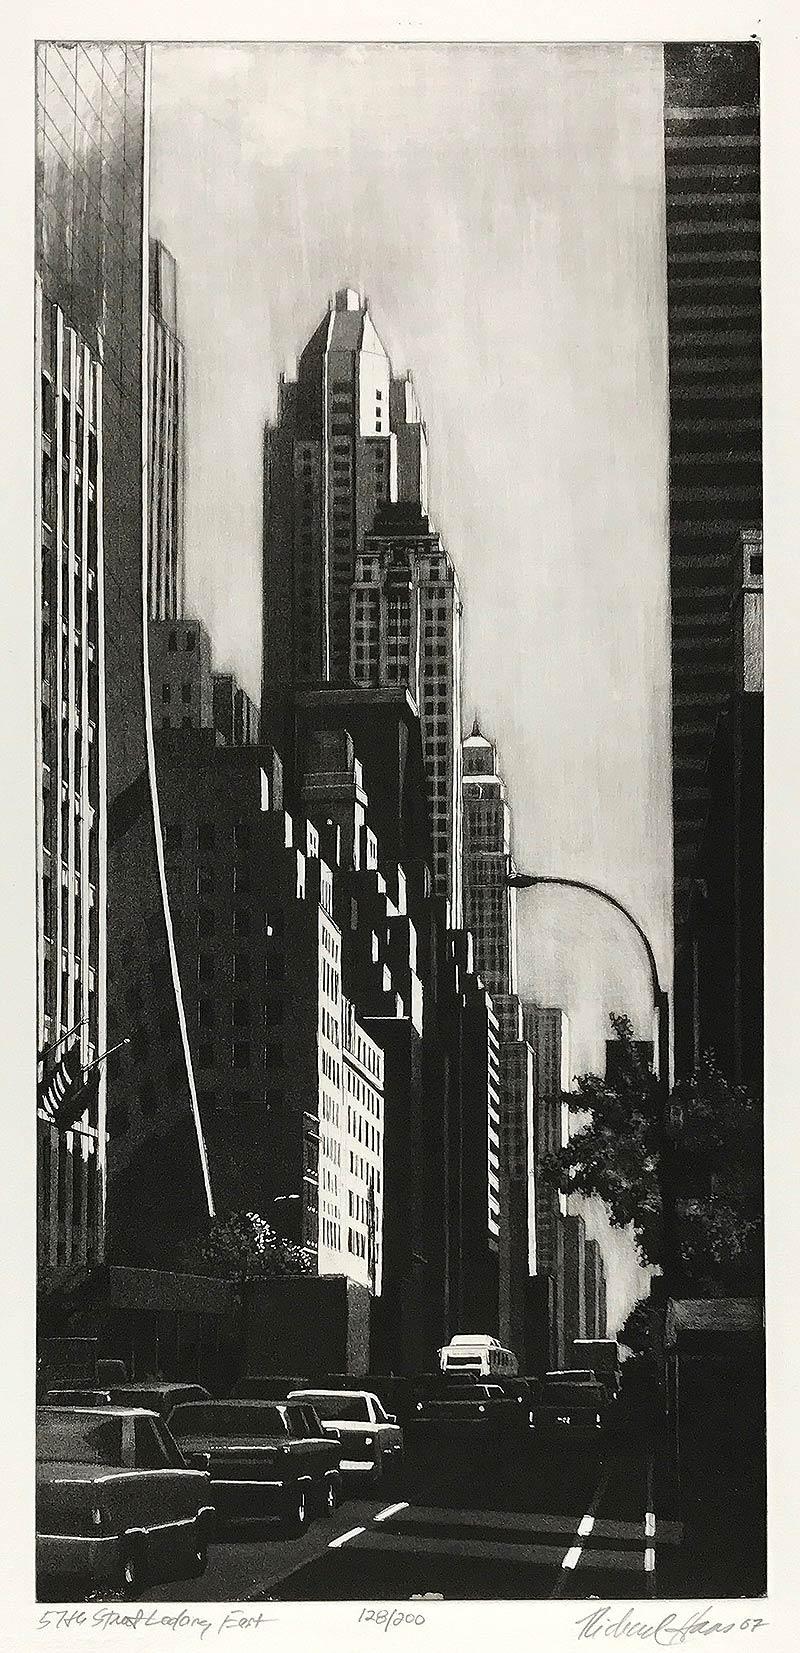 57th St. Looking East (View down Sixth Ave/ Fuller BLDG, the Ritz and IBM seen) - Black Portrait Print by Richard Haas